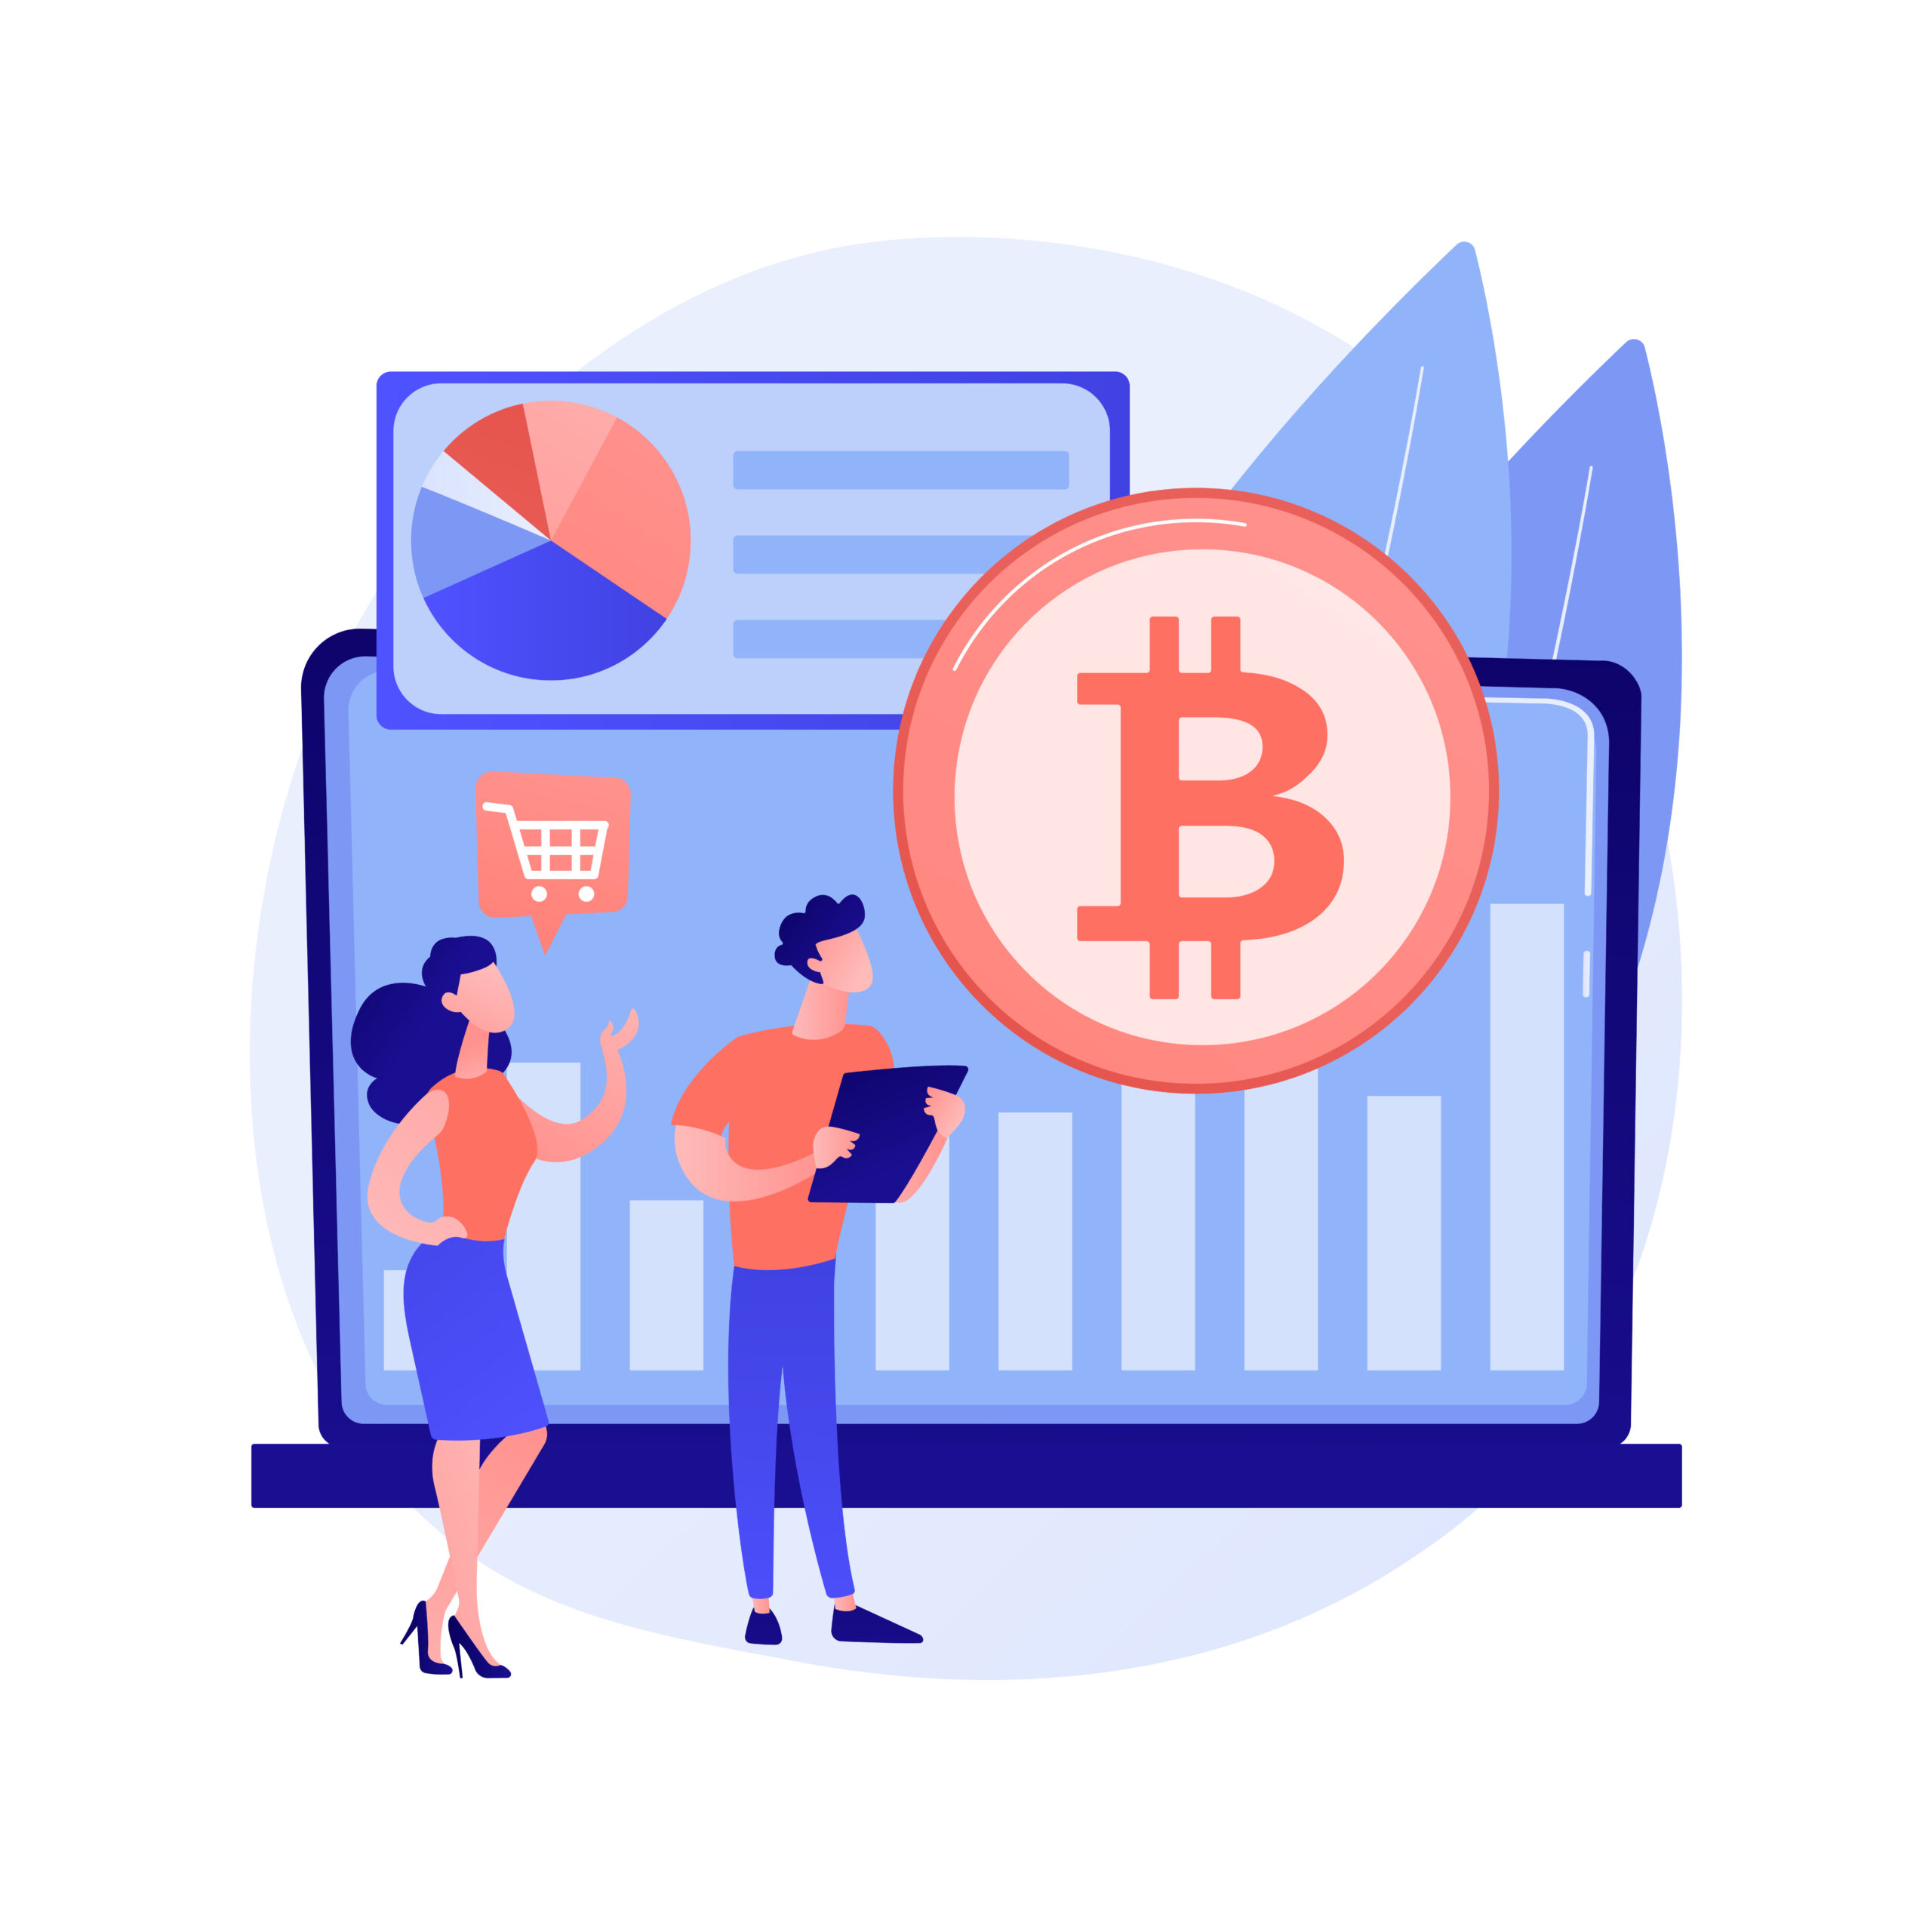 Cryptocurrency market abstract concept vector illustration. Investment opportunity, cryptocurrency market cap, digital currency, news and prices, capitalization ranking, finance abstract metaphor.